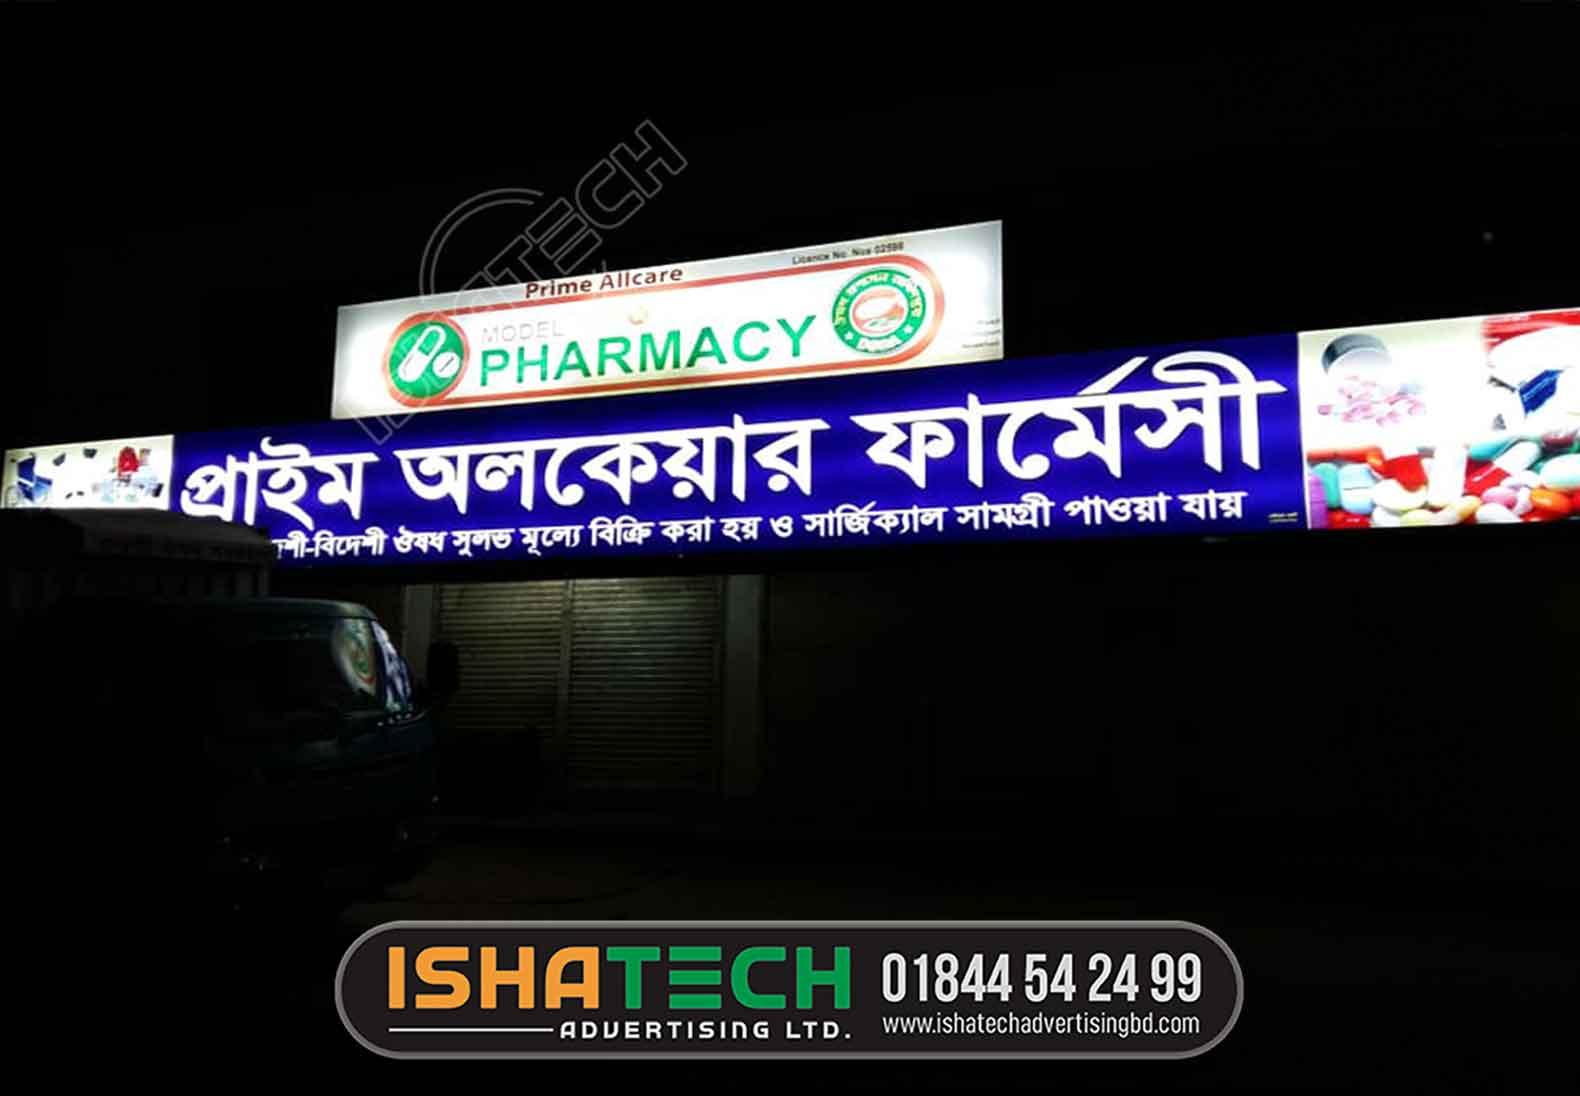 PRIME ALLCARE PHARMACY SIGNBOARD AND BILLBOARD